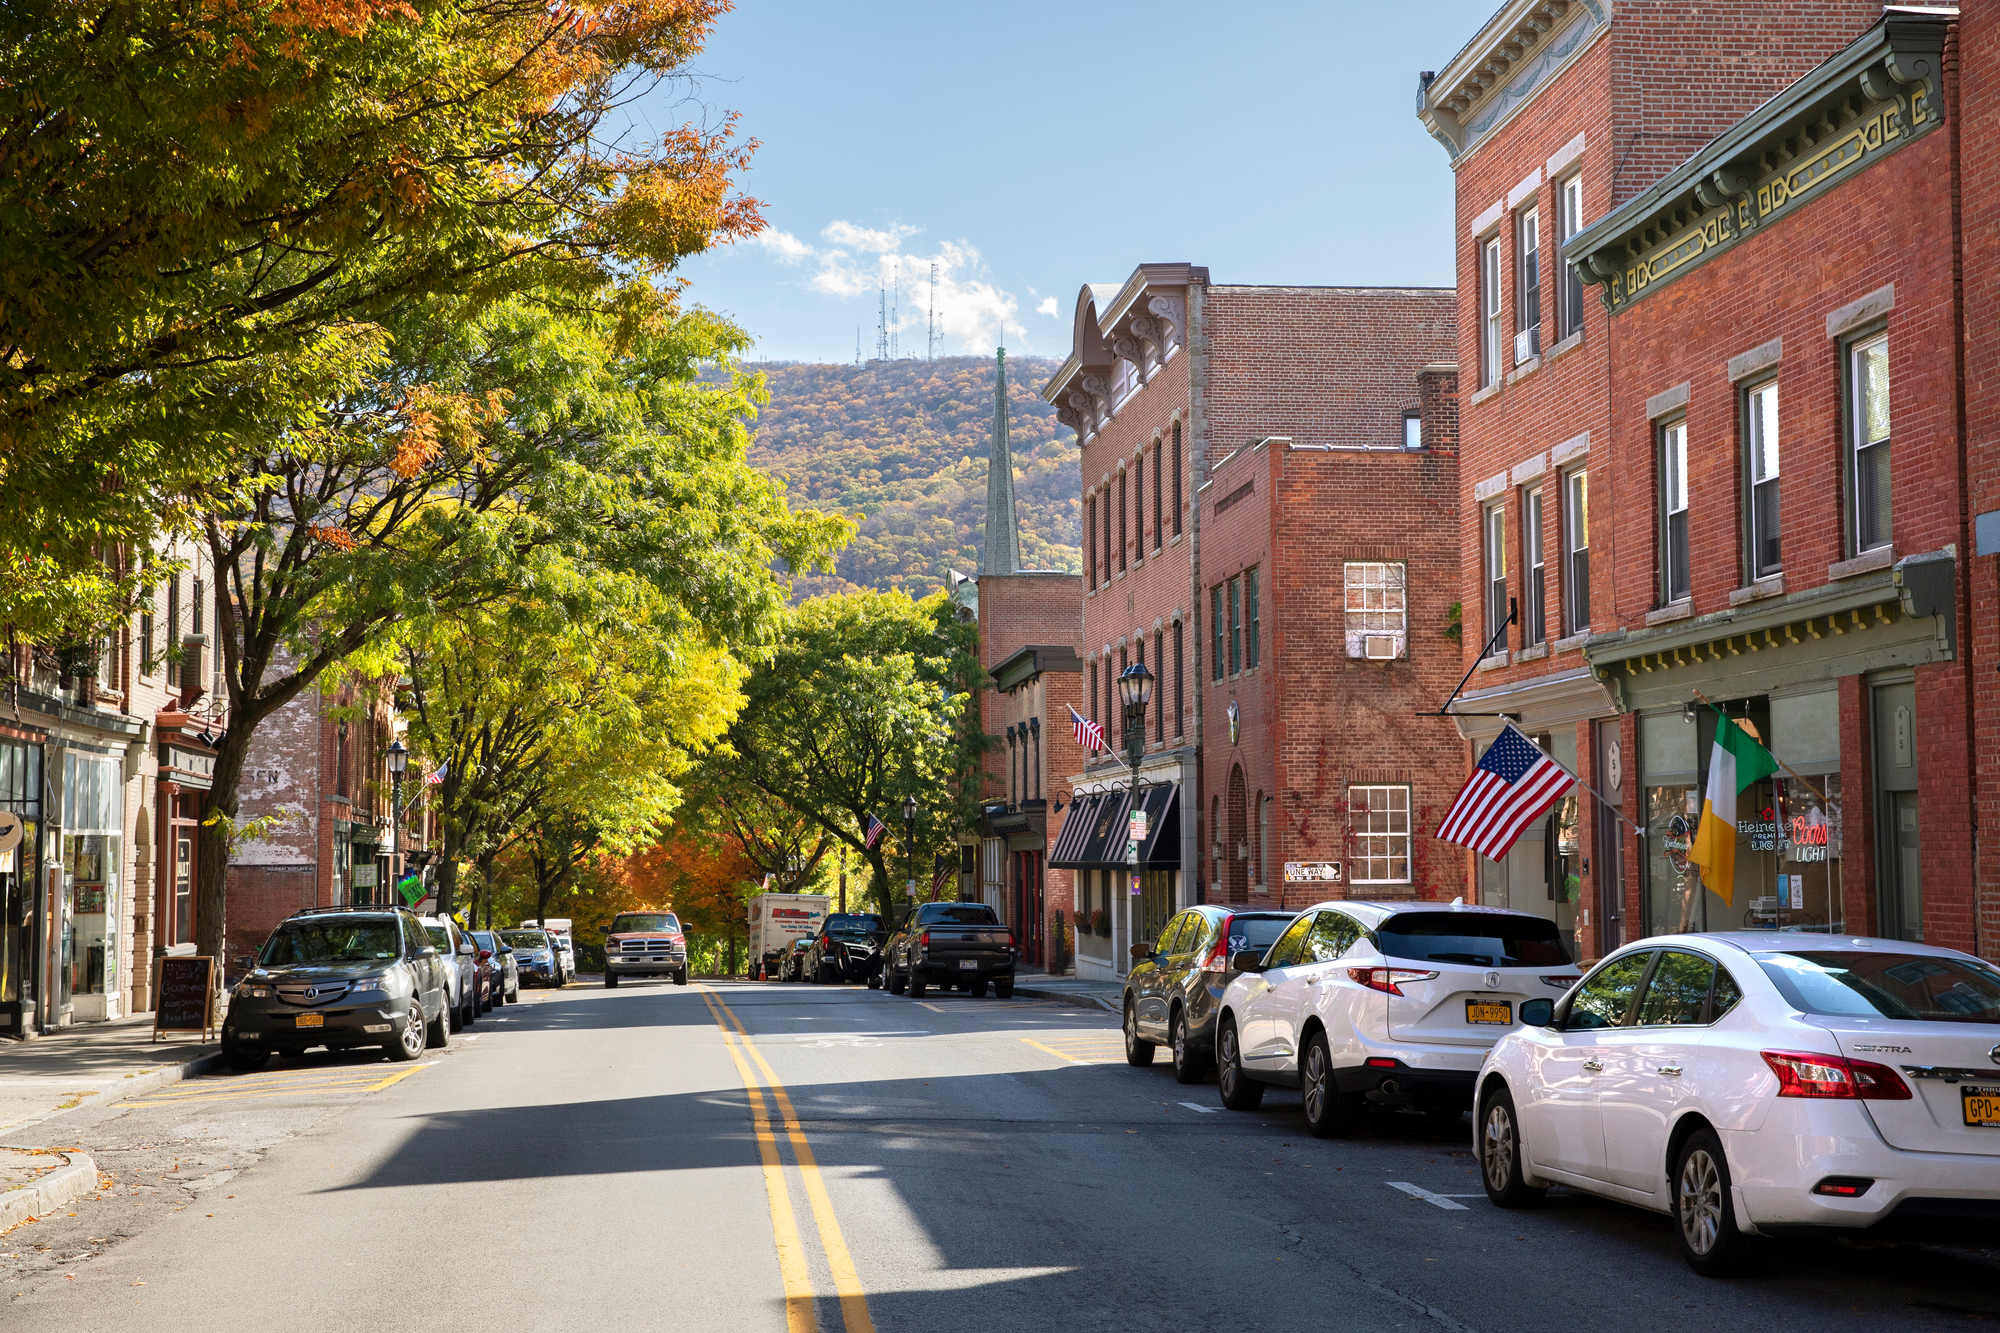 Beacon is a quaint, accessible town to visit in Dutchess County